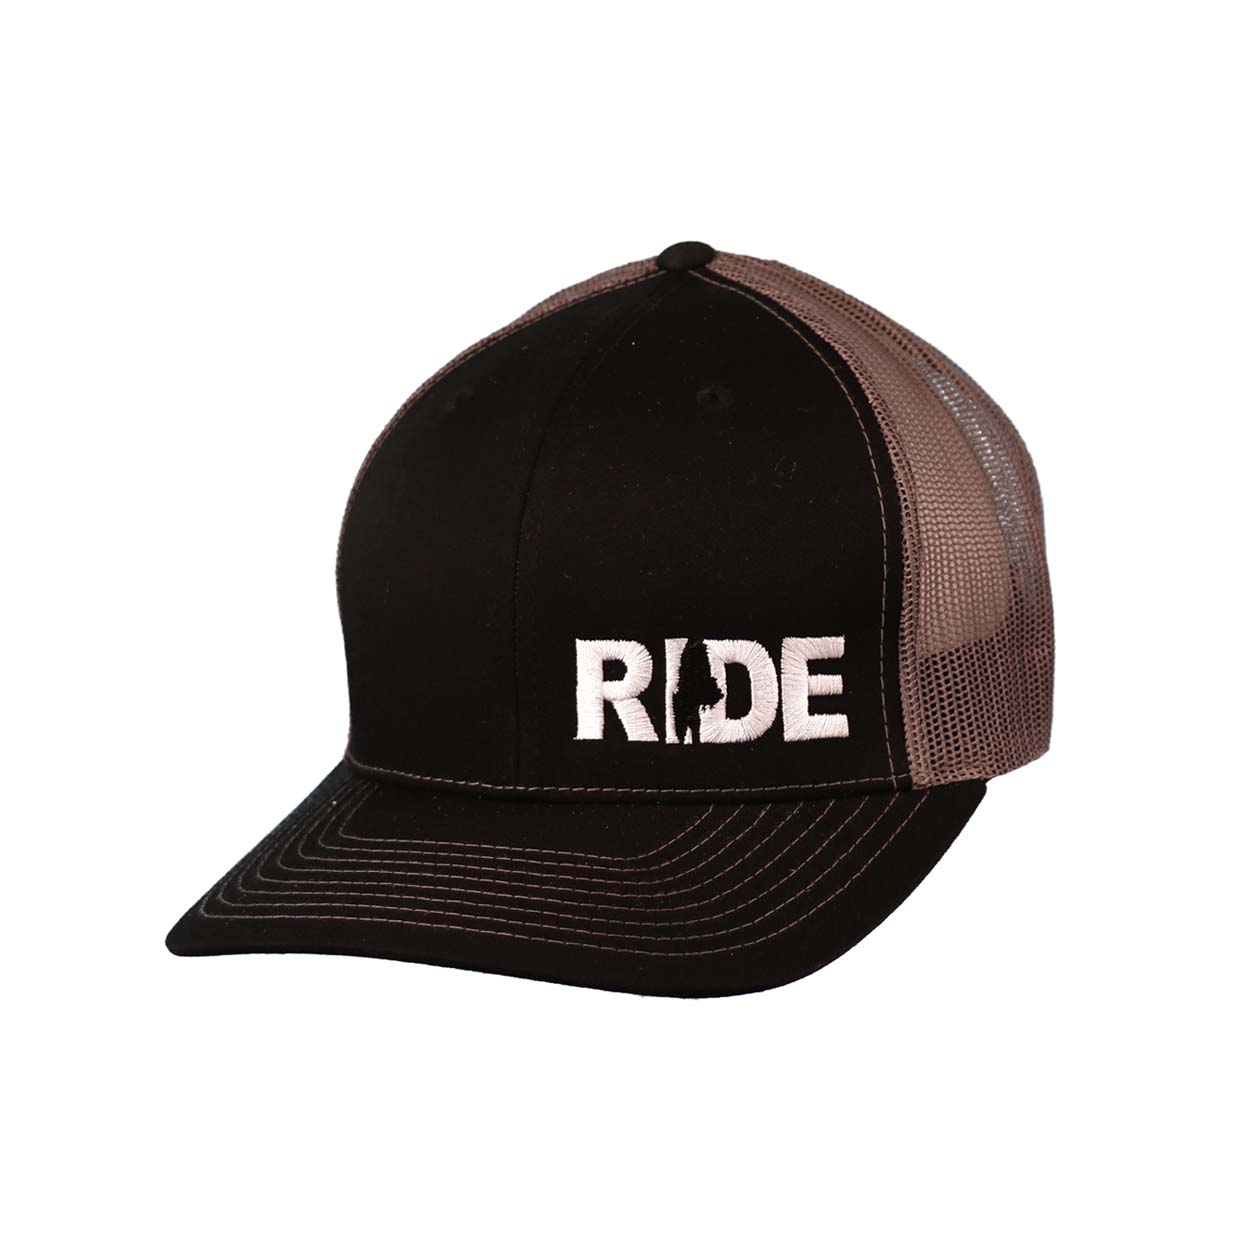 Ride Maine Classic Pro Night Out Embroidered Snapback Trucker Hat Black/Gray